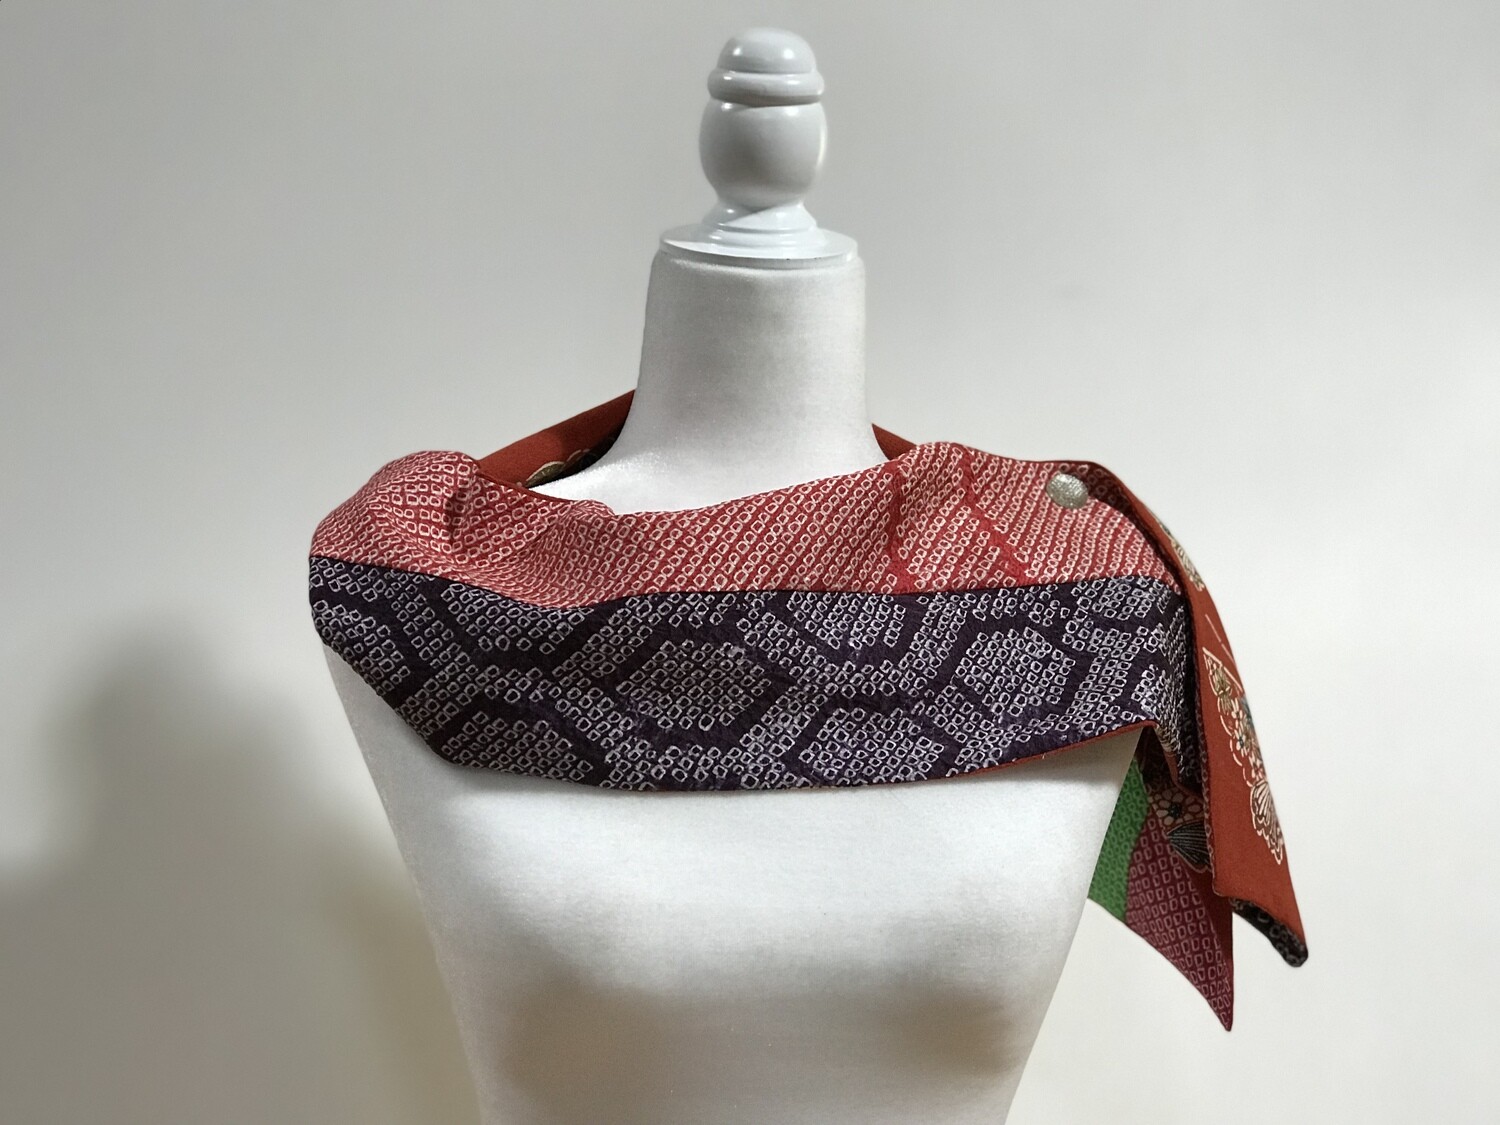 Scarf
6.5 x 50.5in